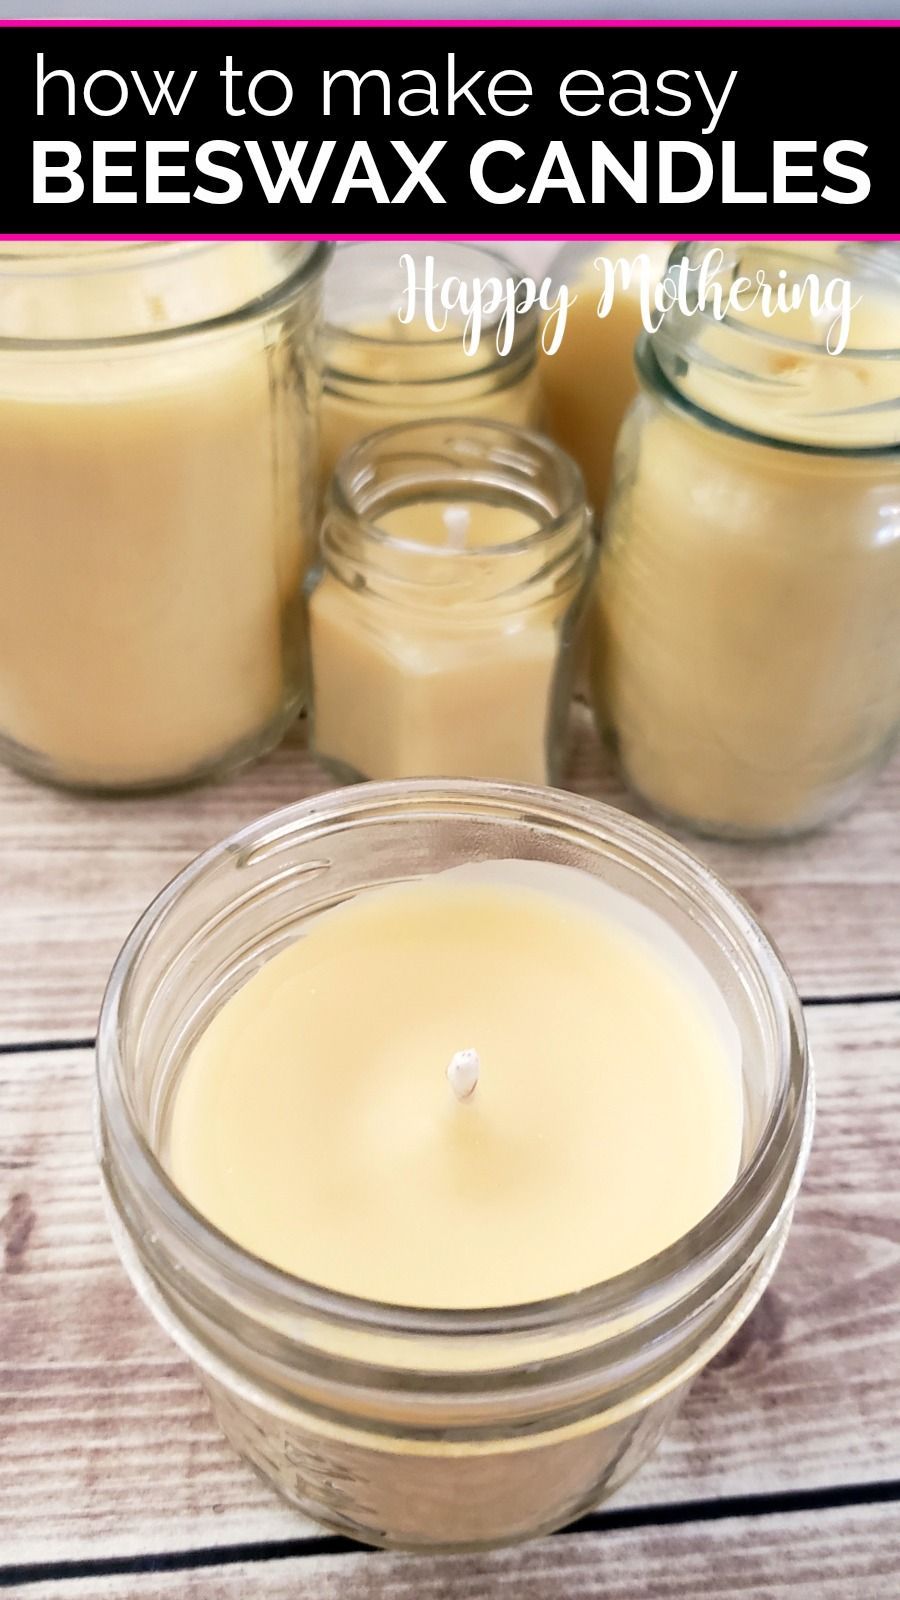 How to Make Easy DIY Beeswax Candles - Happy Mothering - How to Make Easy DIY Beeswax Candles - Happy Mothering -   19 diy Candles beeswax ideas